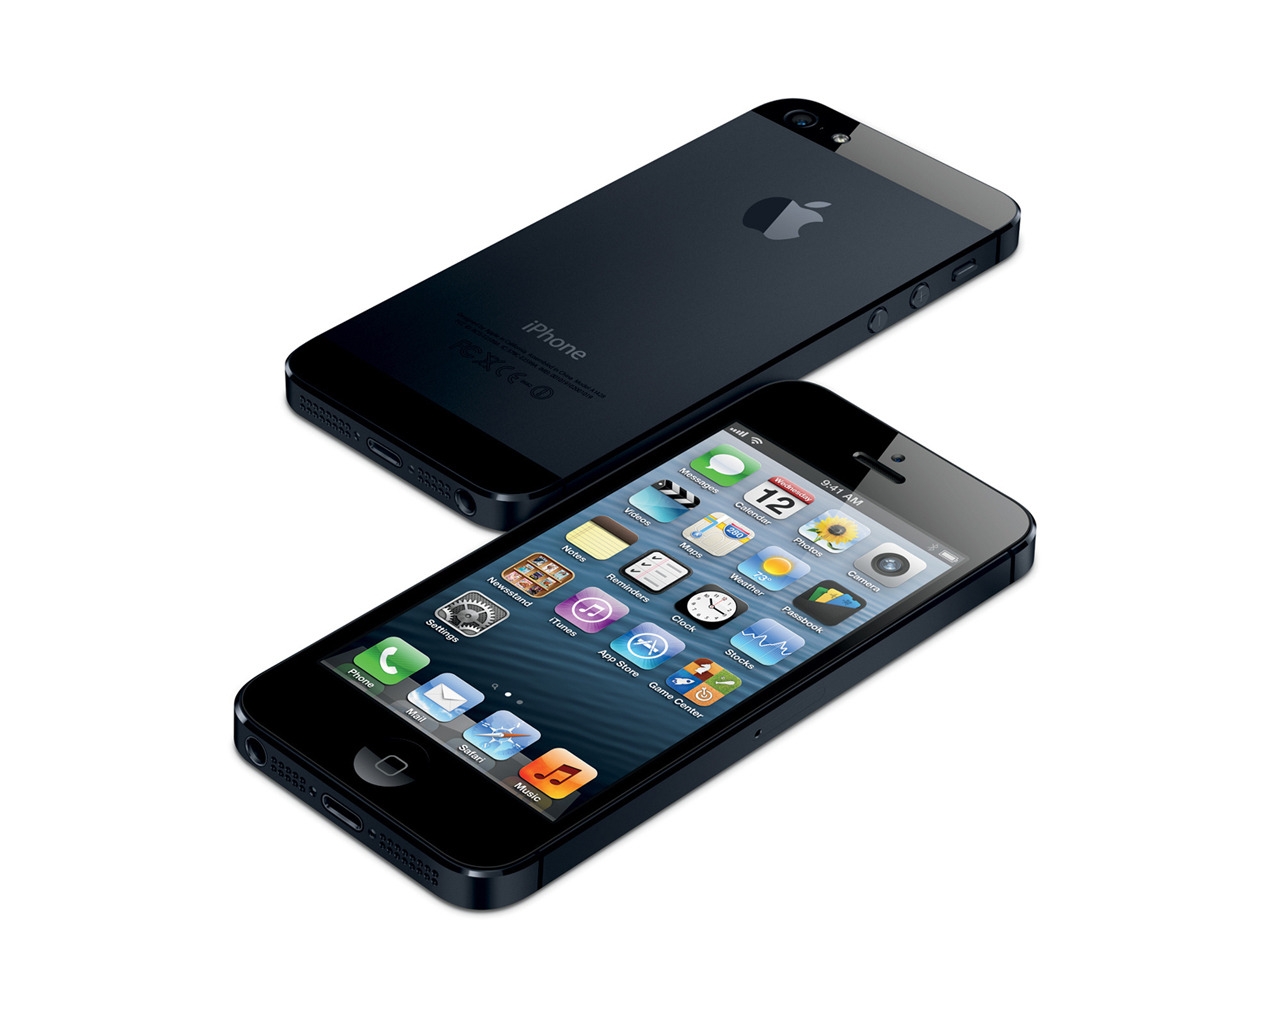 Black iPhone 5 for 1280 x 1024 resolution